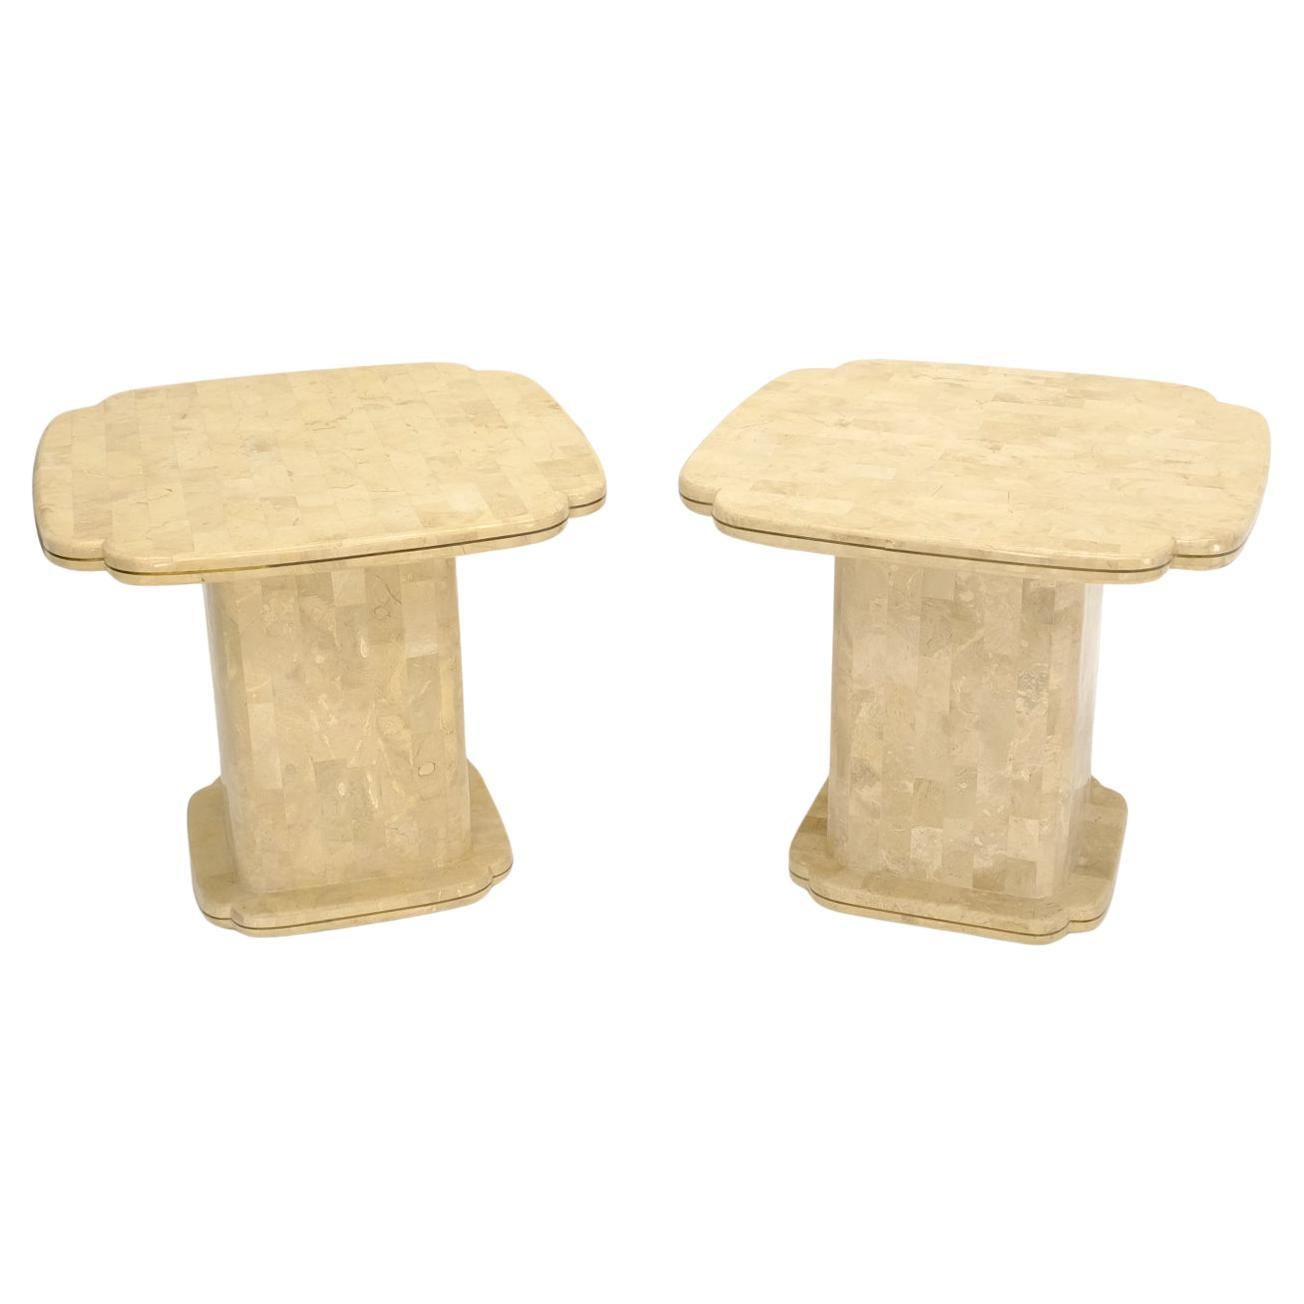 Pair of Mid-Century Modern single pedestal tessellated stone brass trim end night tables stands.